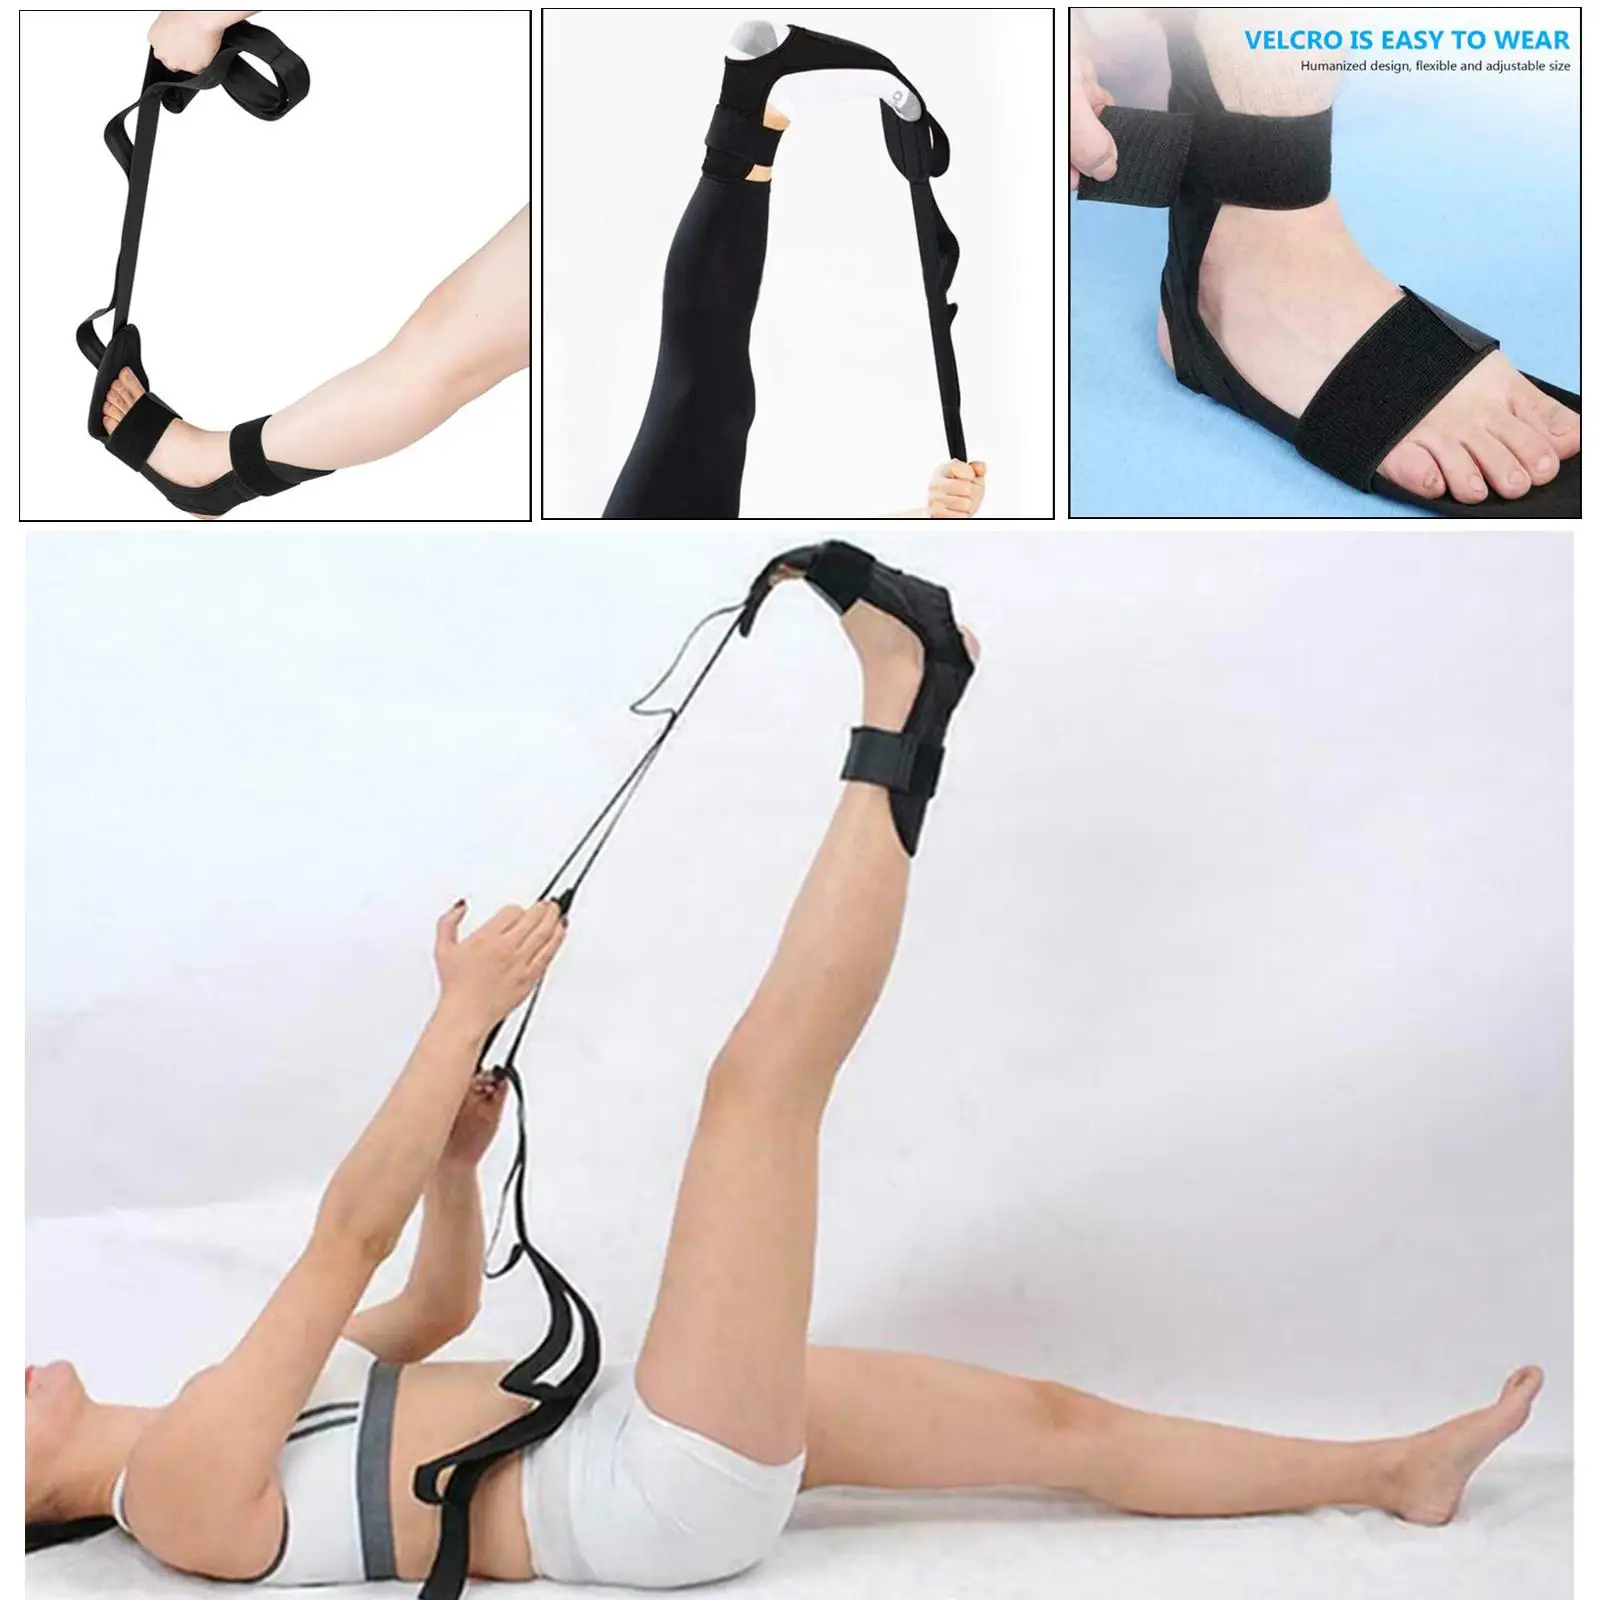  & Foot Stretcher Set Stretching for Physical Therapy Plantar Fasciitis Pilates Dance Athletic Trainers